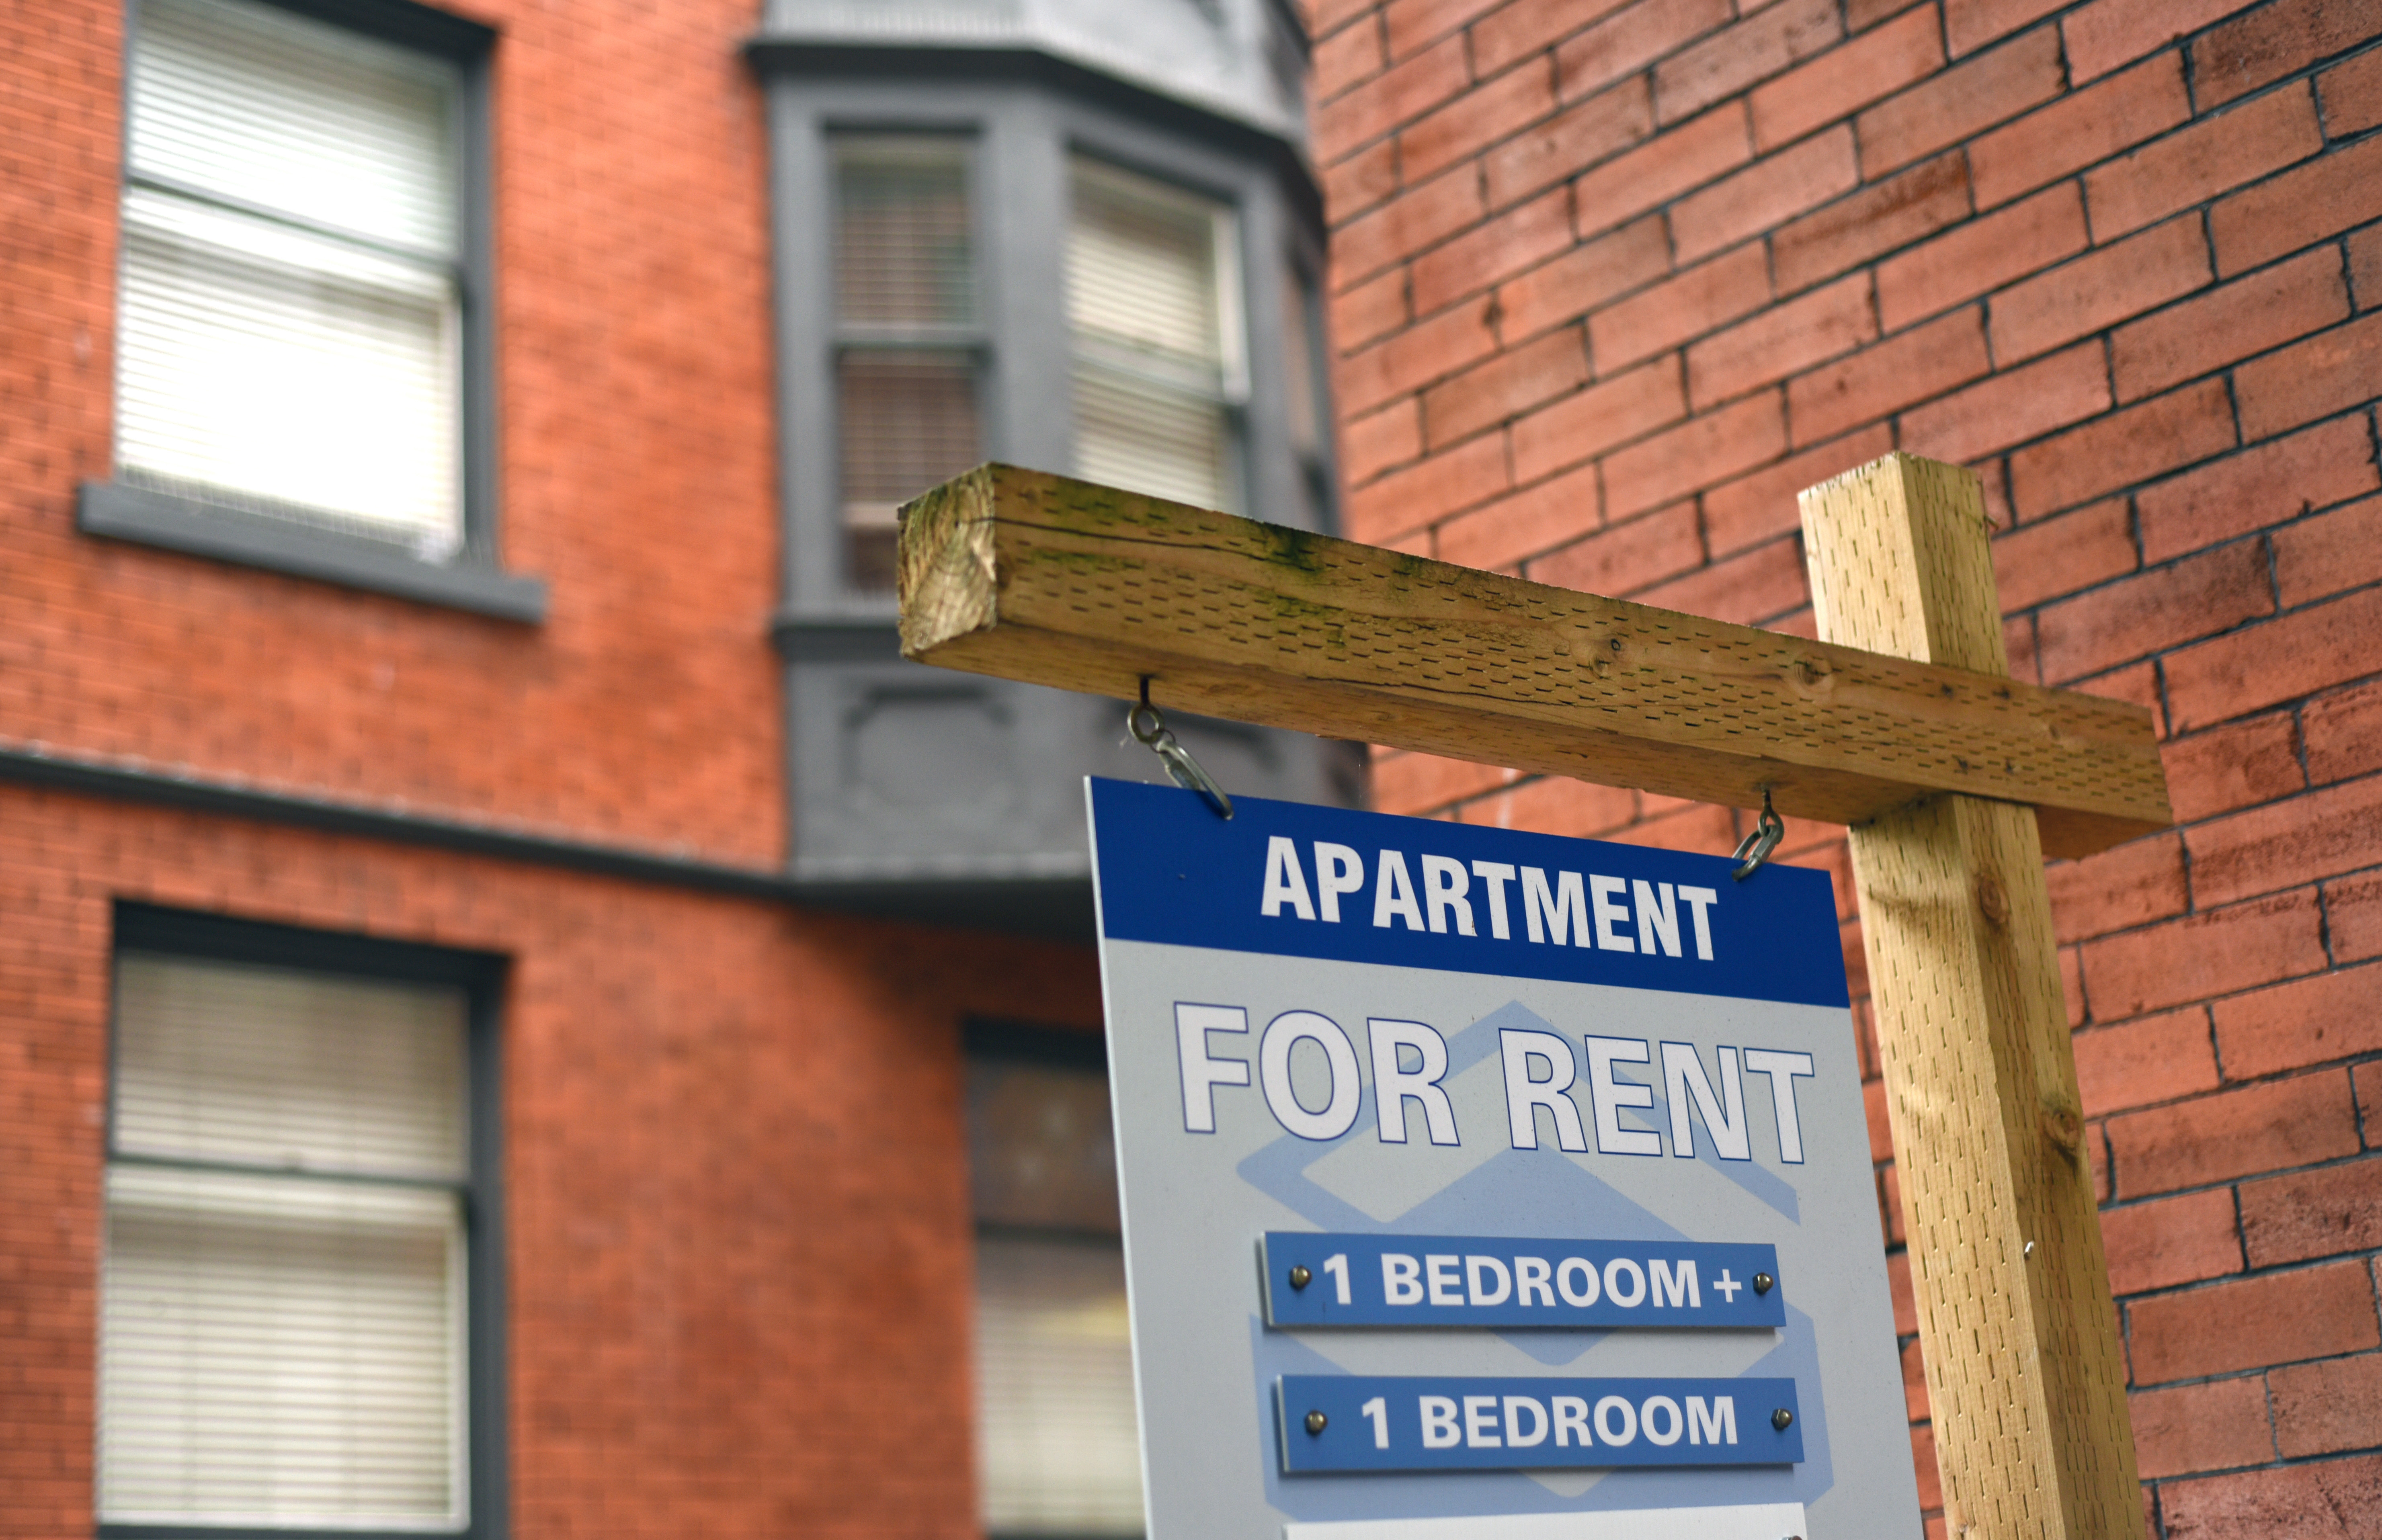 Rentals should be at centre of housing solutions, federal advocate urges